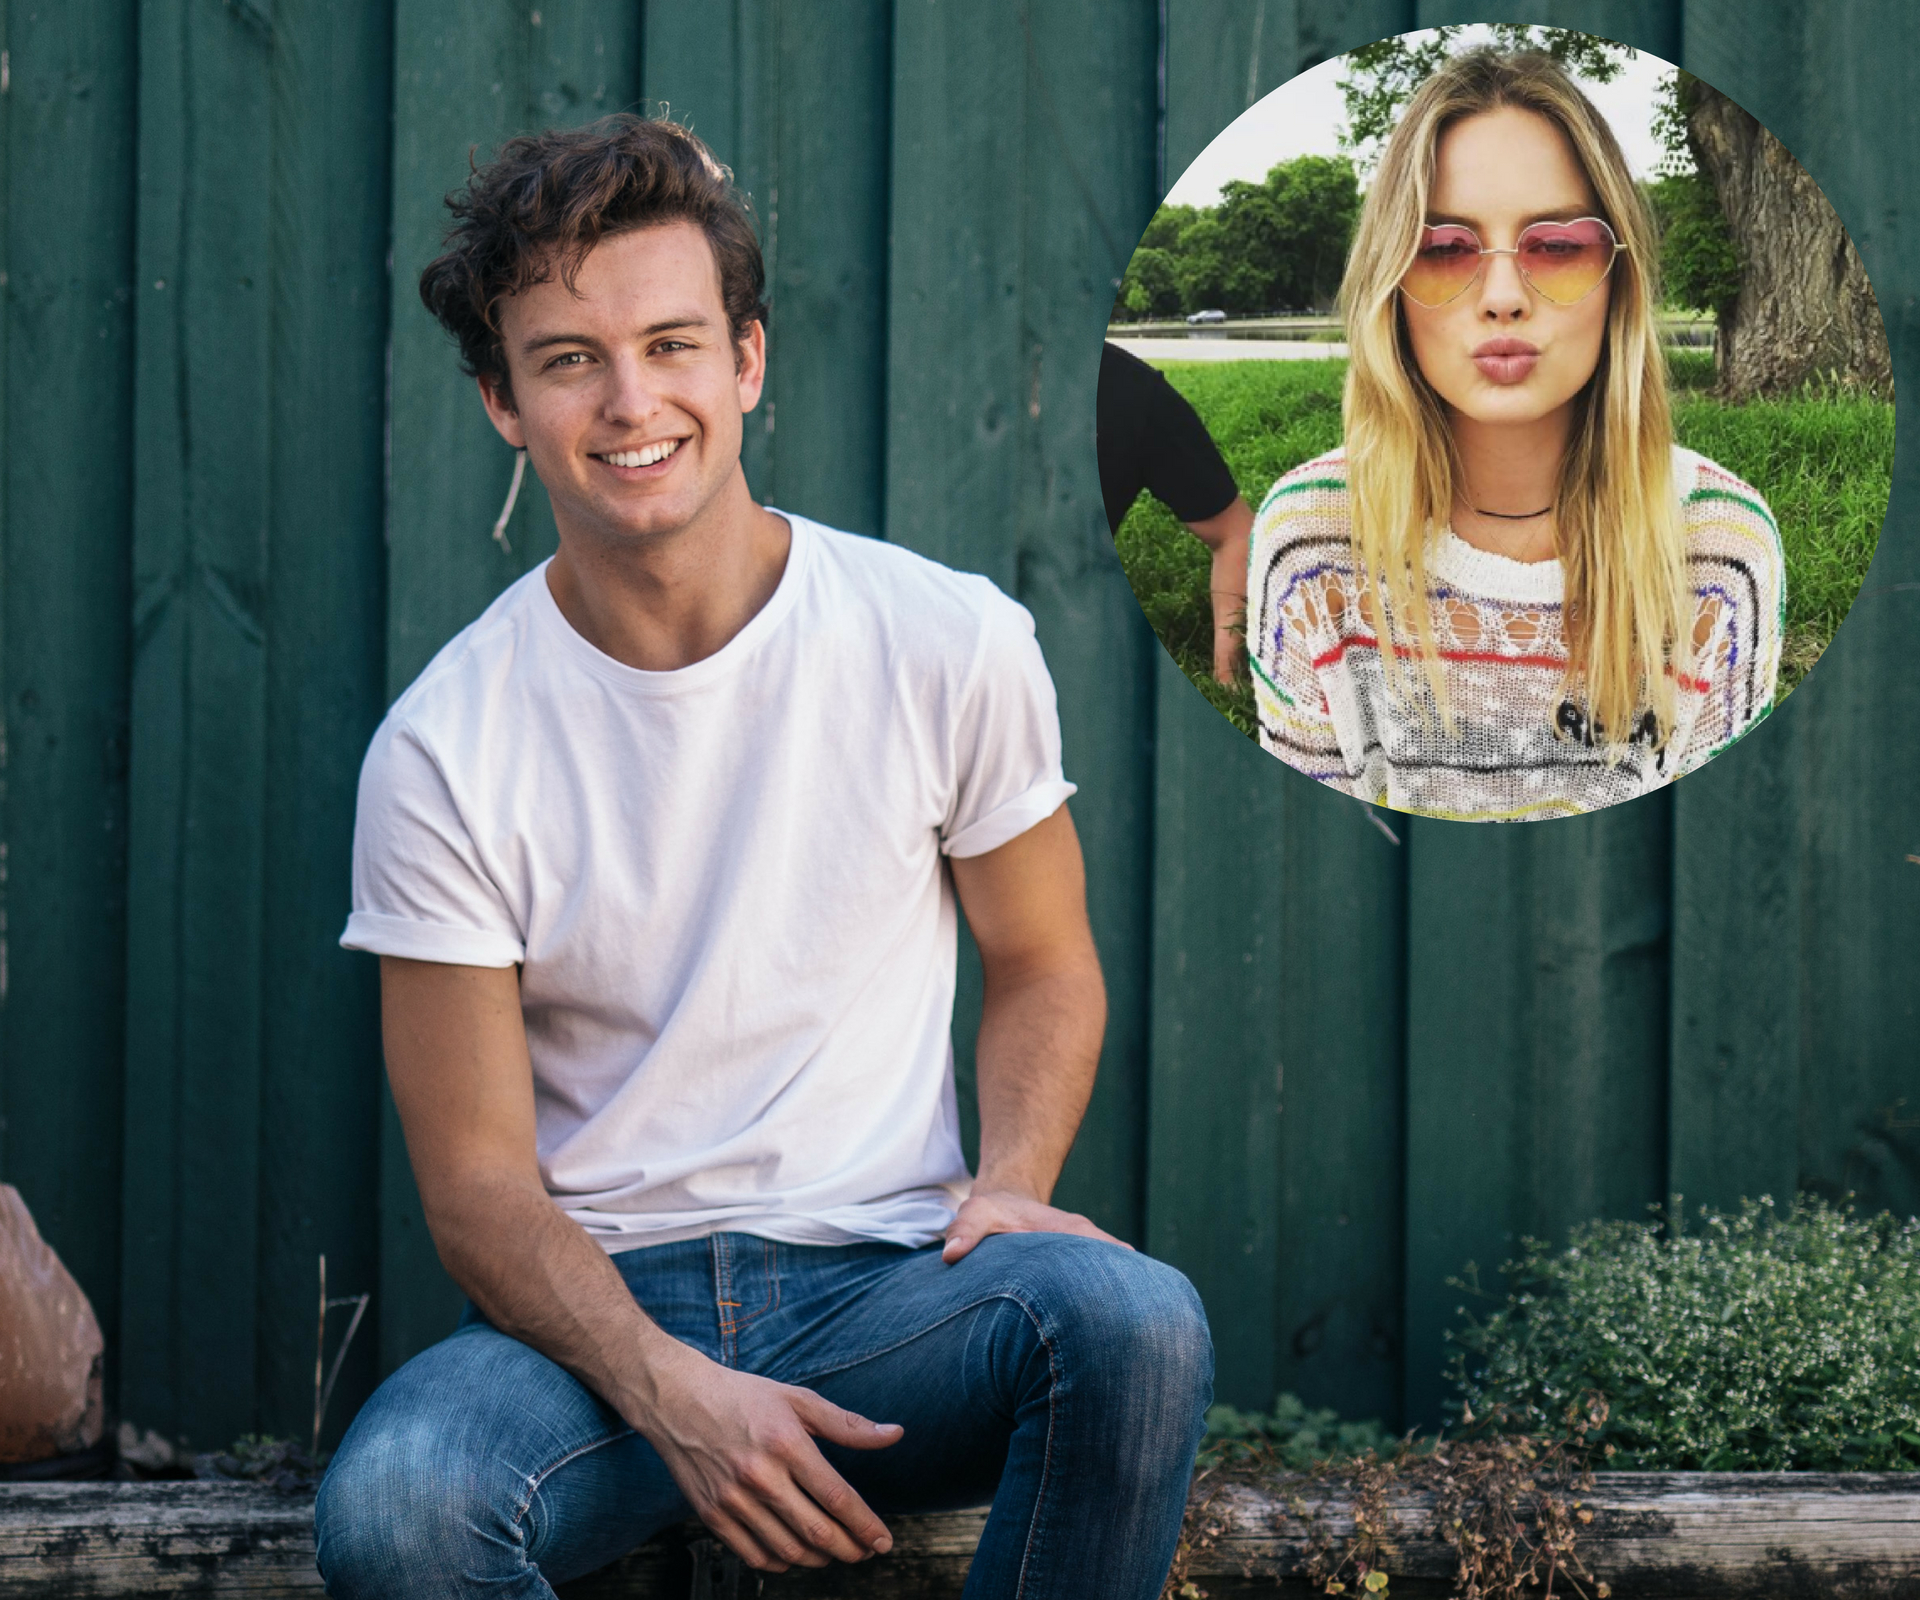 EXCLUSIVE: Margot Robbie’s brother Cameron Robbie spills his sister’s secrets!